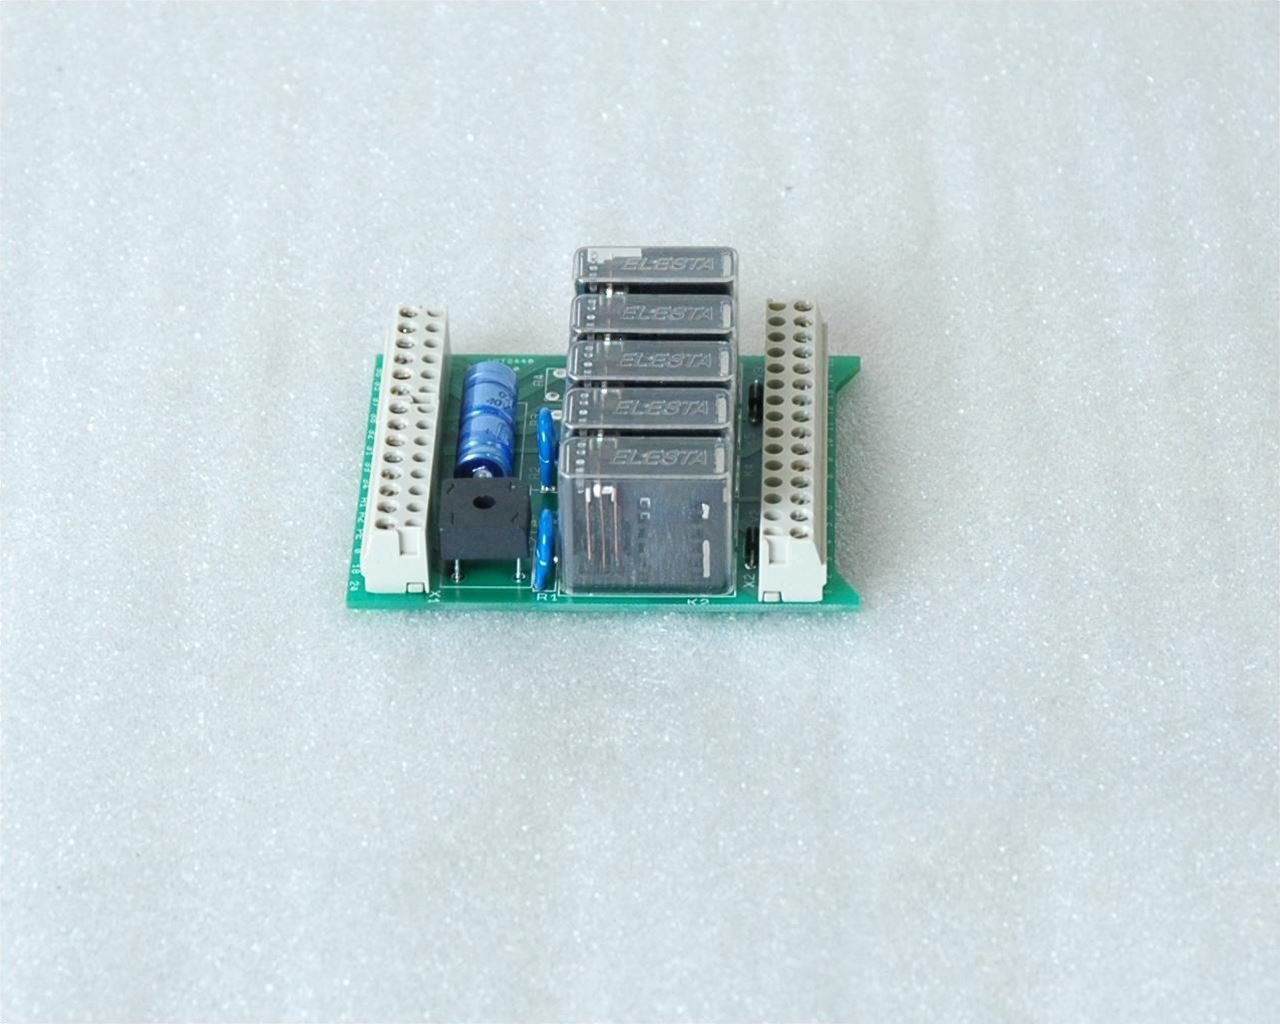 Lift table spare part - Circuit board, 5 relays